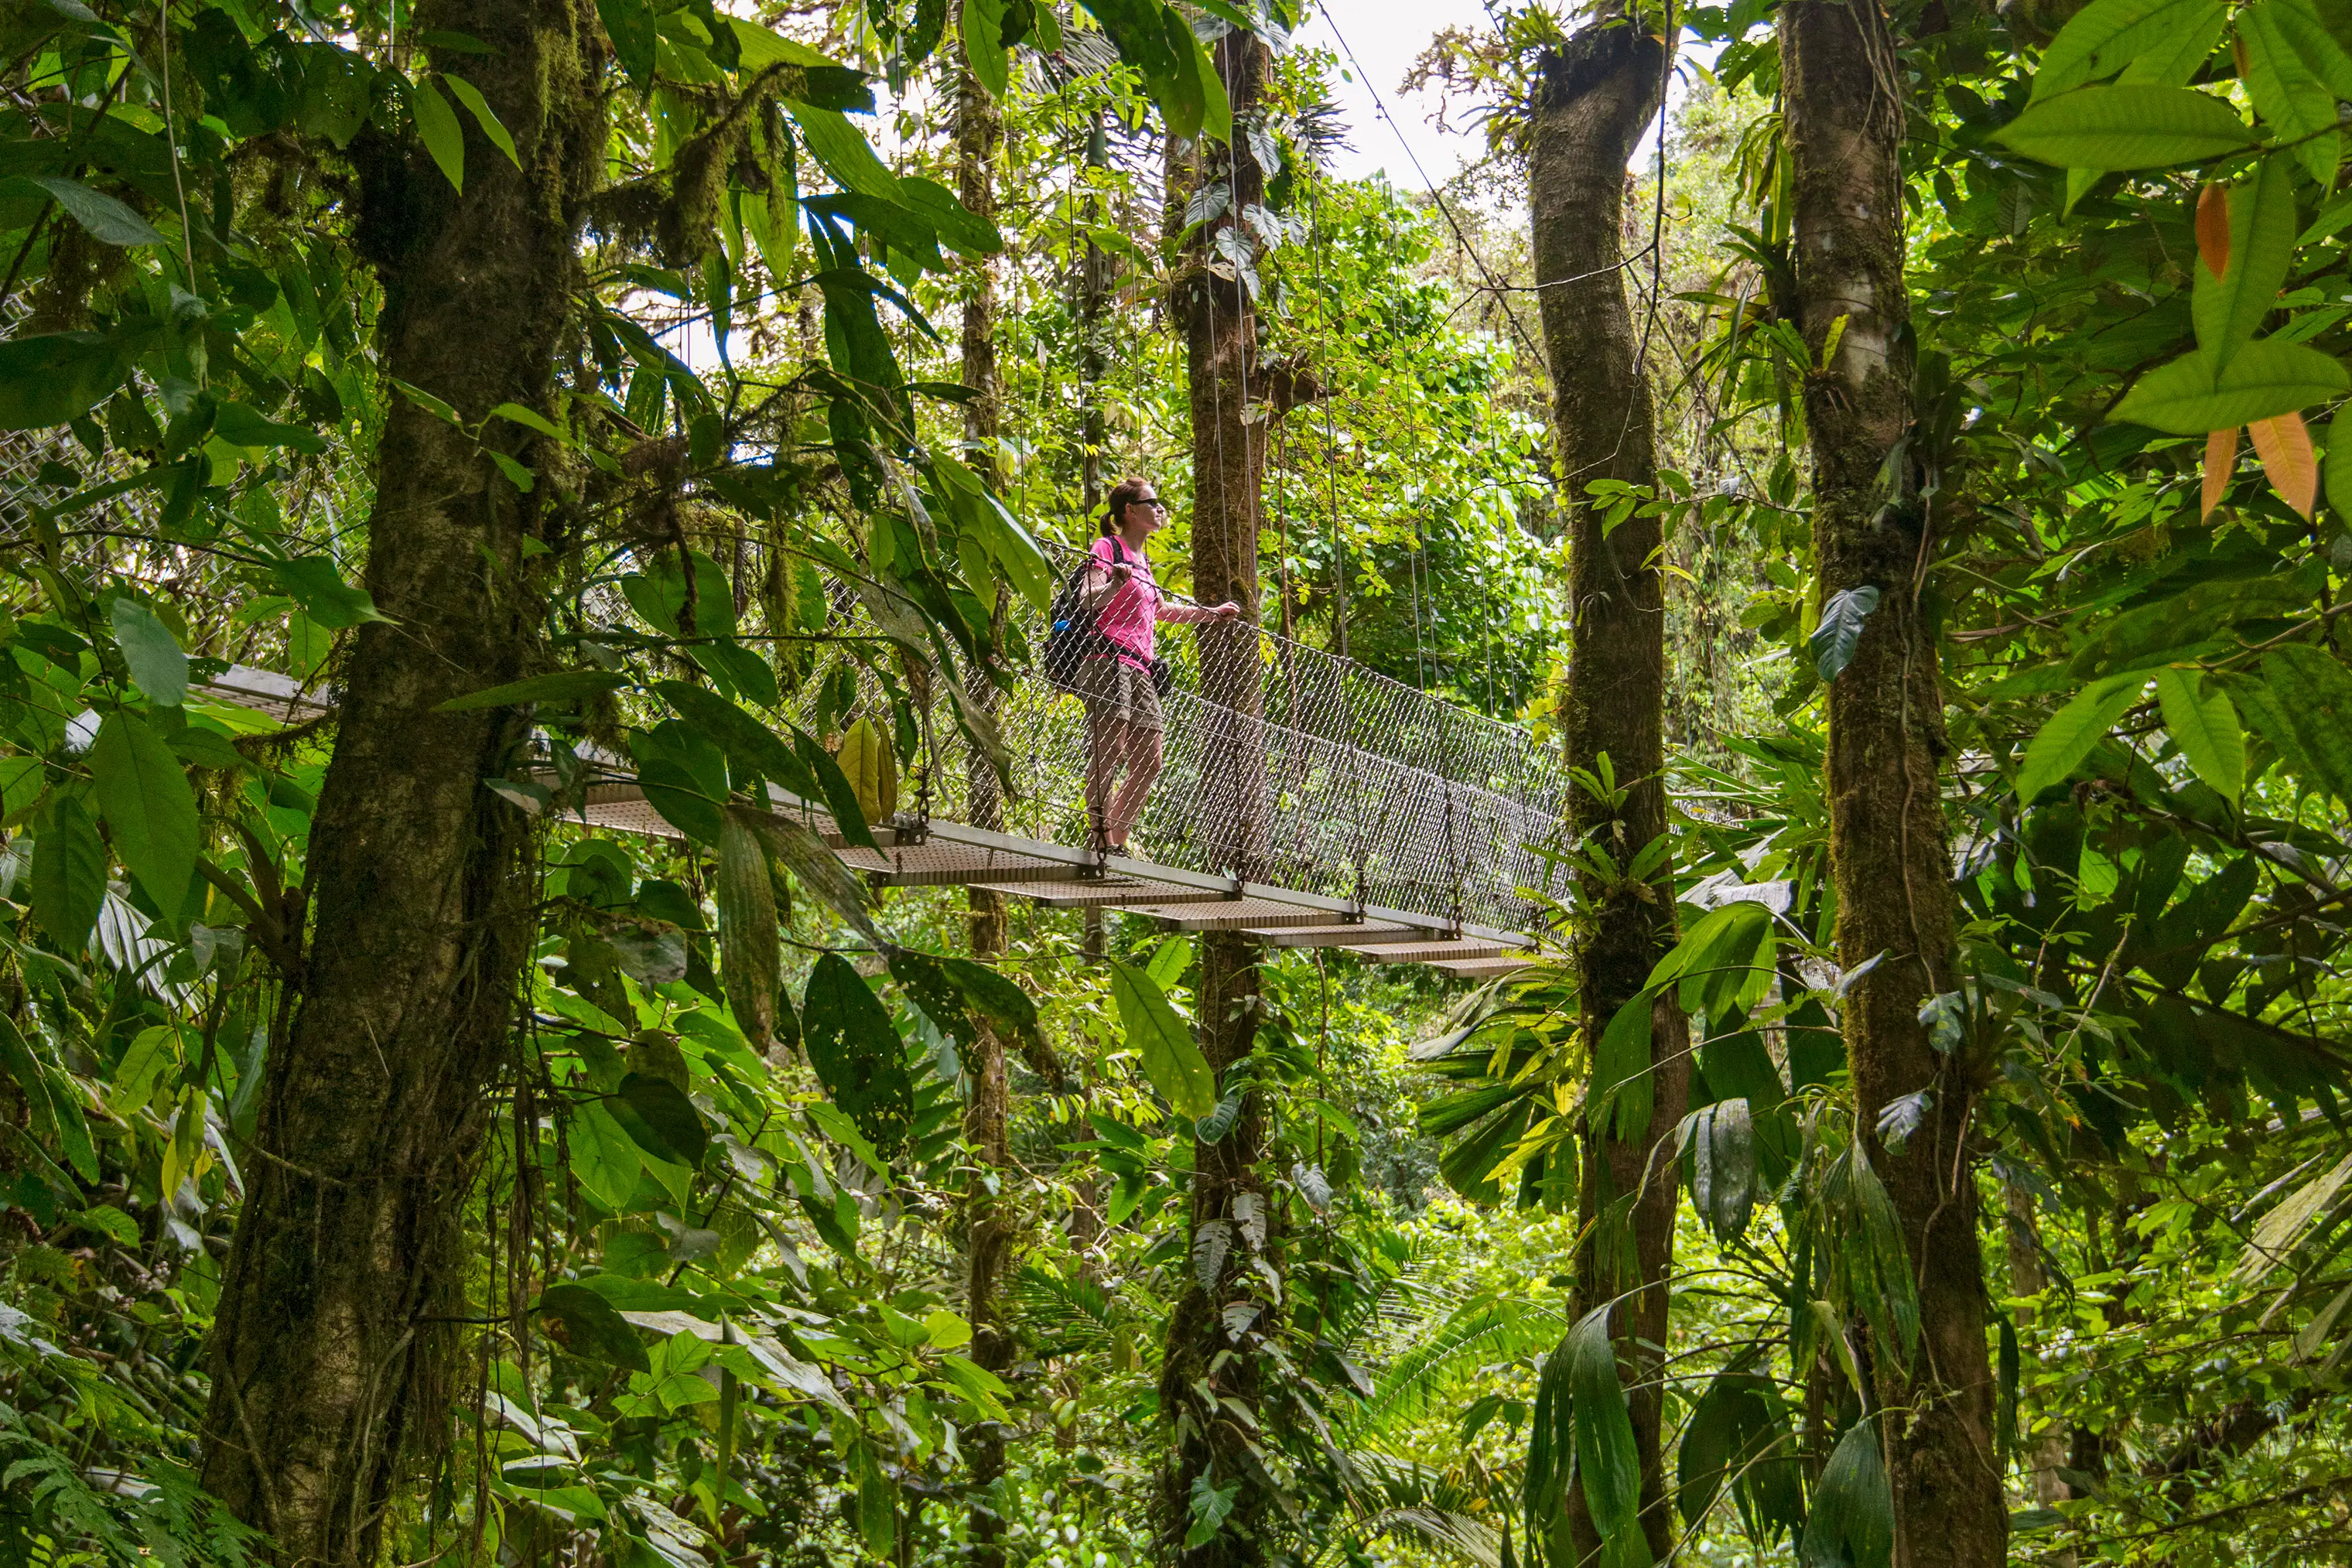 The Monteverde Cloud Forest Reserve gives visitors an up-close view of the regionâ€™s vast biodiversity.